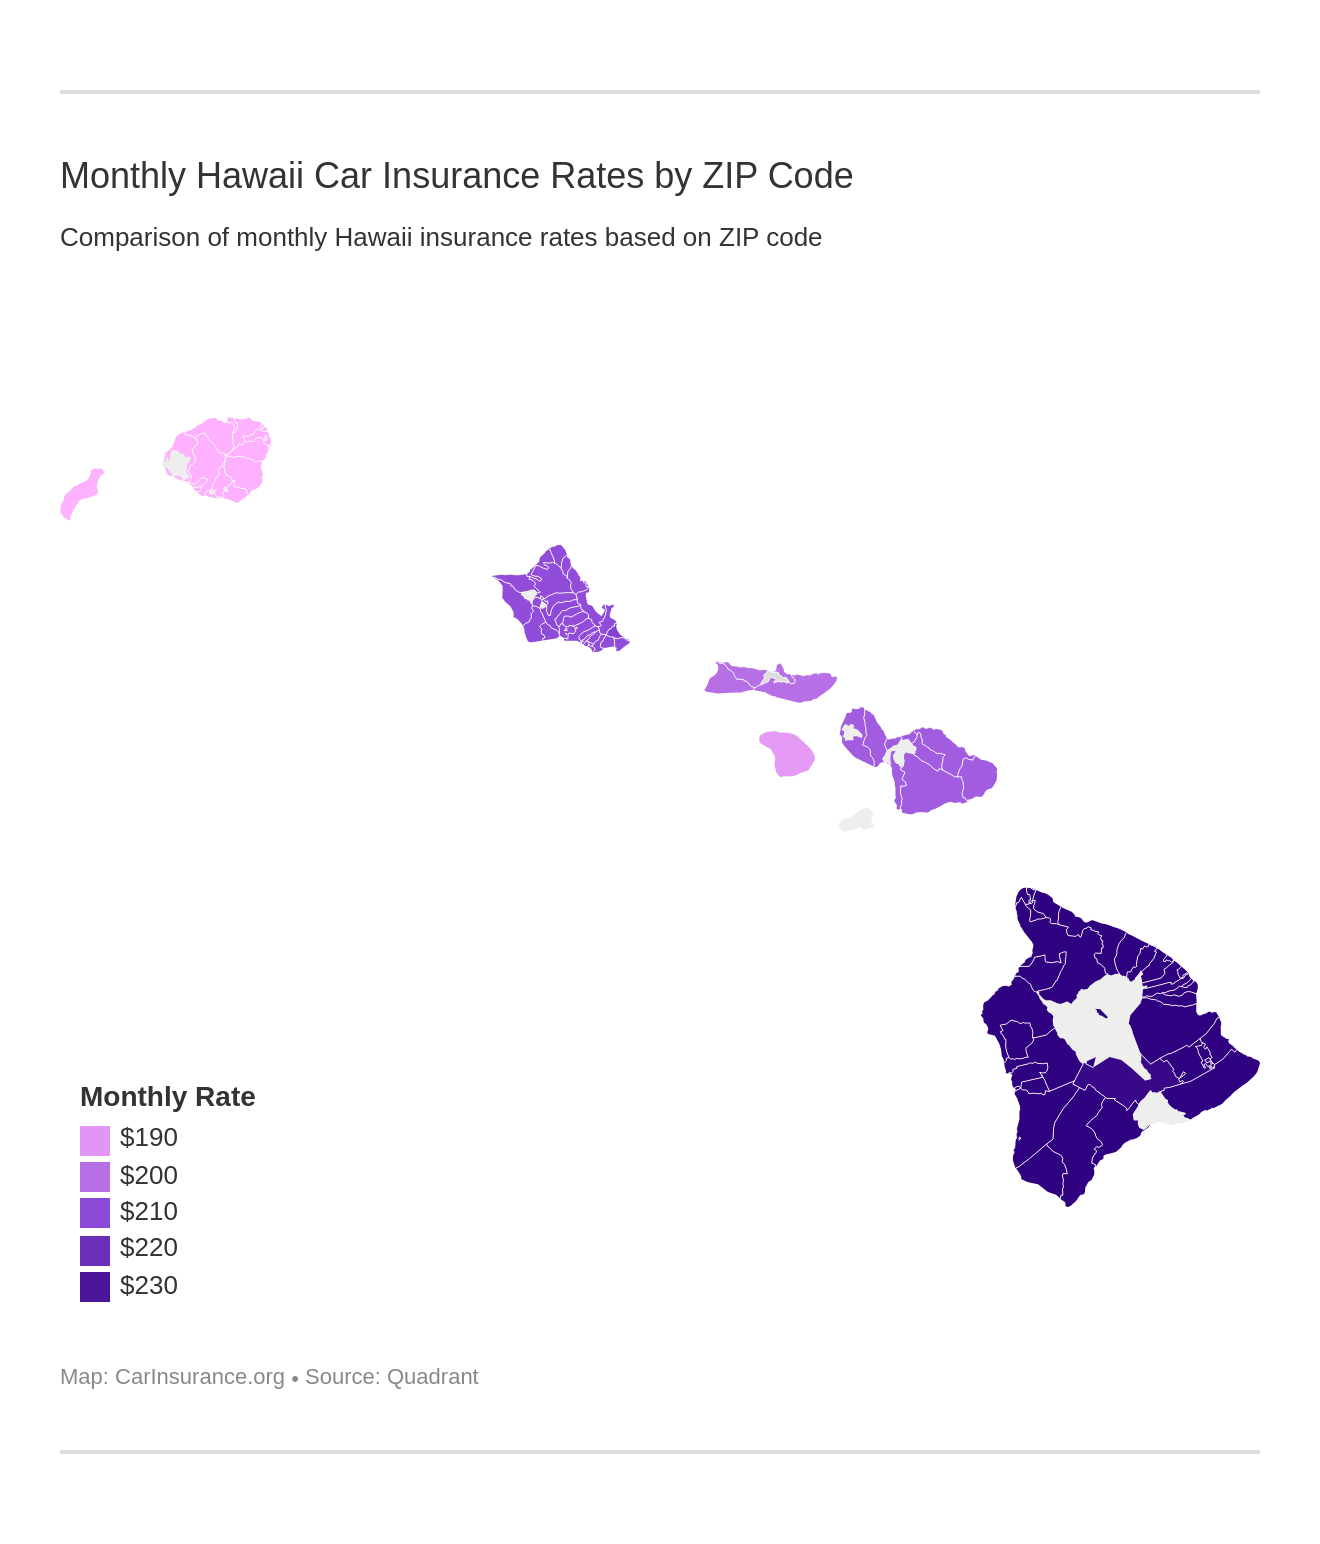 Monthly Hawaii Car Insurance Rates by ZIP Code